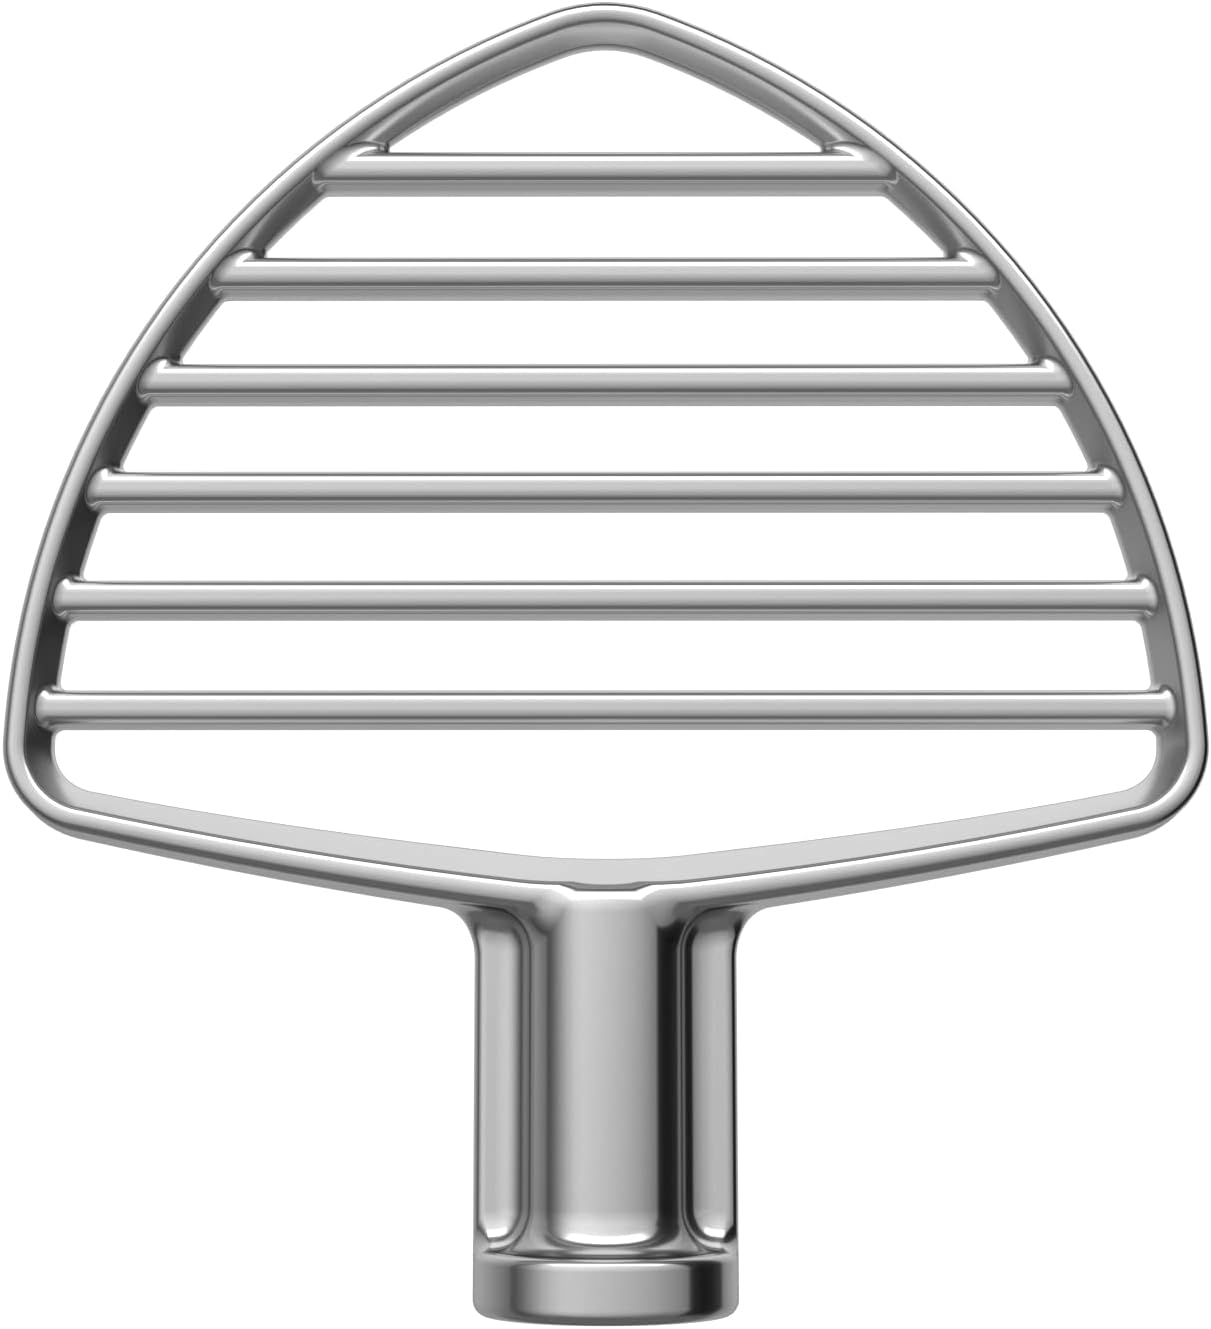 Kitchenaid KSMPB7SS Stainless Steel Pastry Beater for Kitchenaid Bowl-Lift Stand Mixer